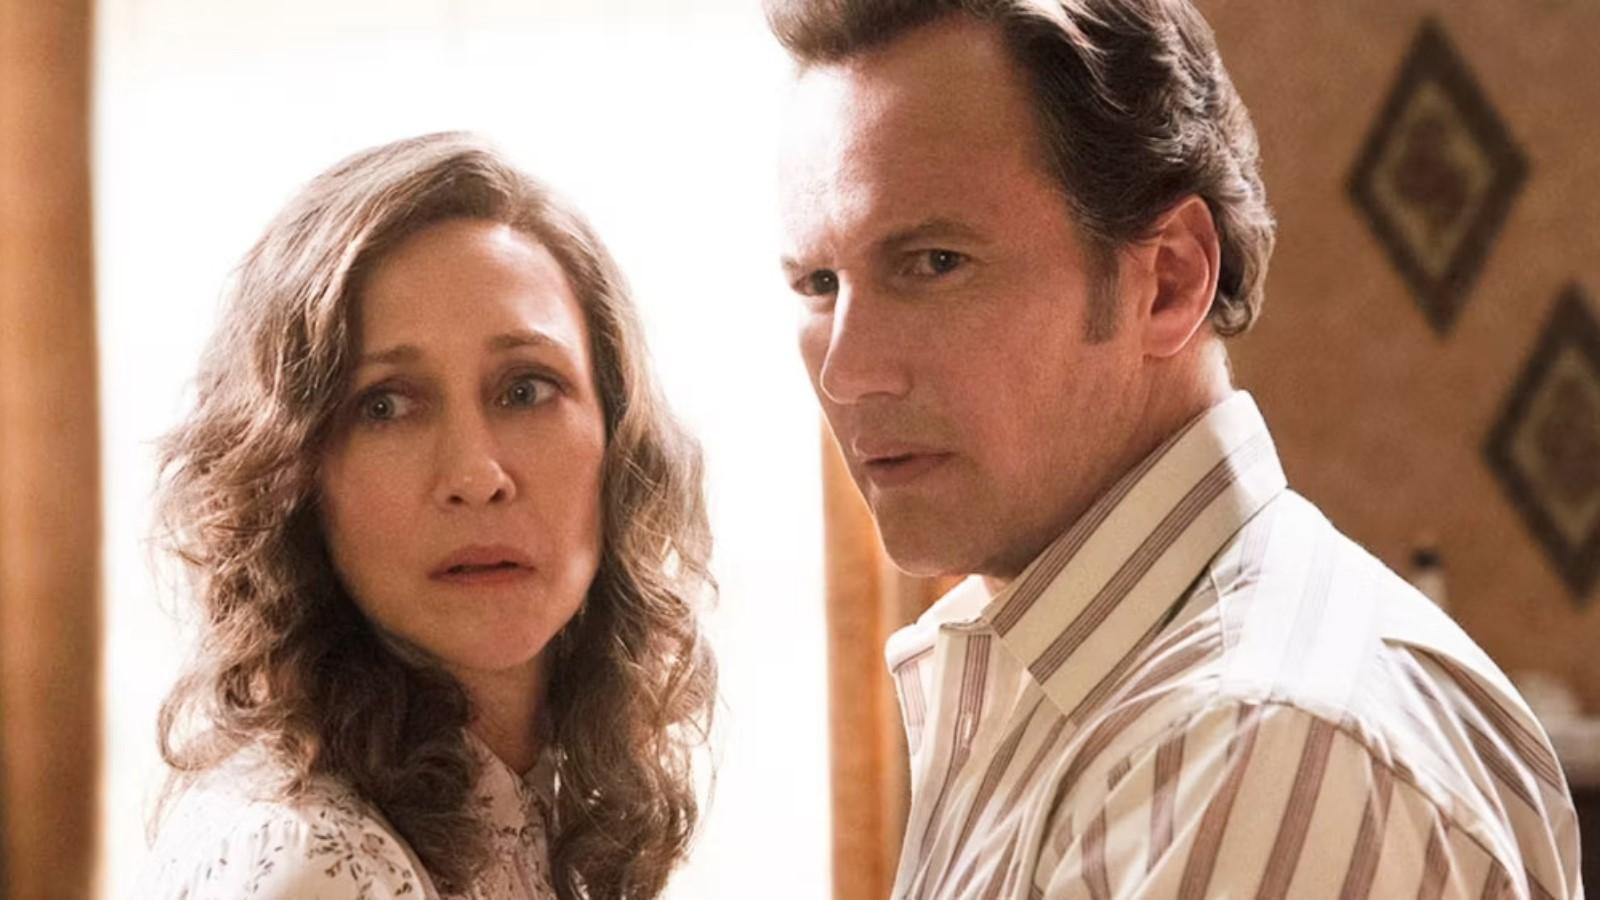 Vera Farmiga and Patrick Wilson as Lorraine and Ed Warren in The Conjuring